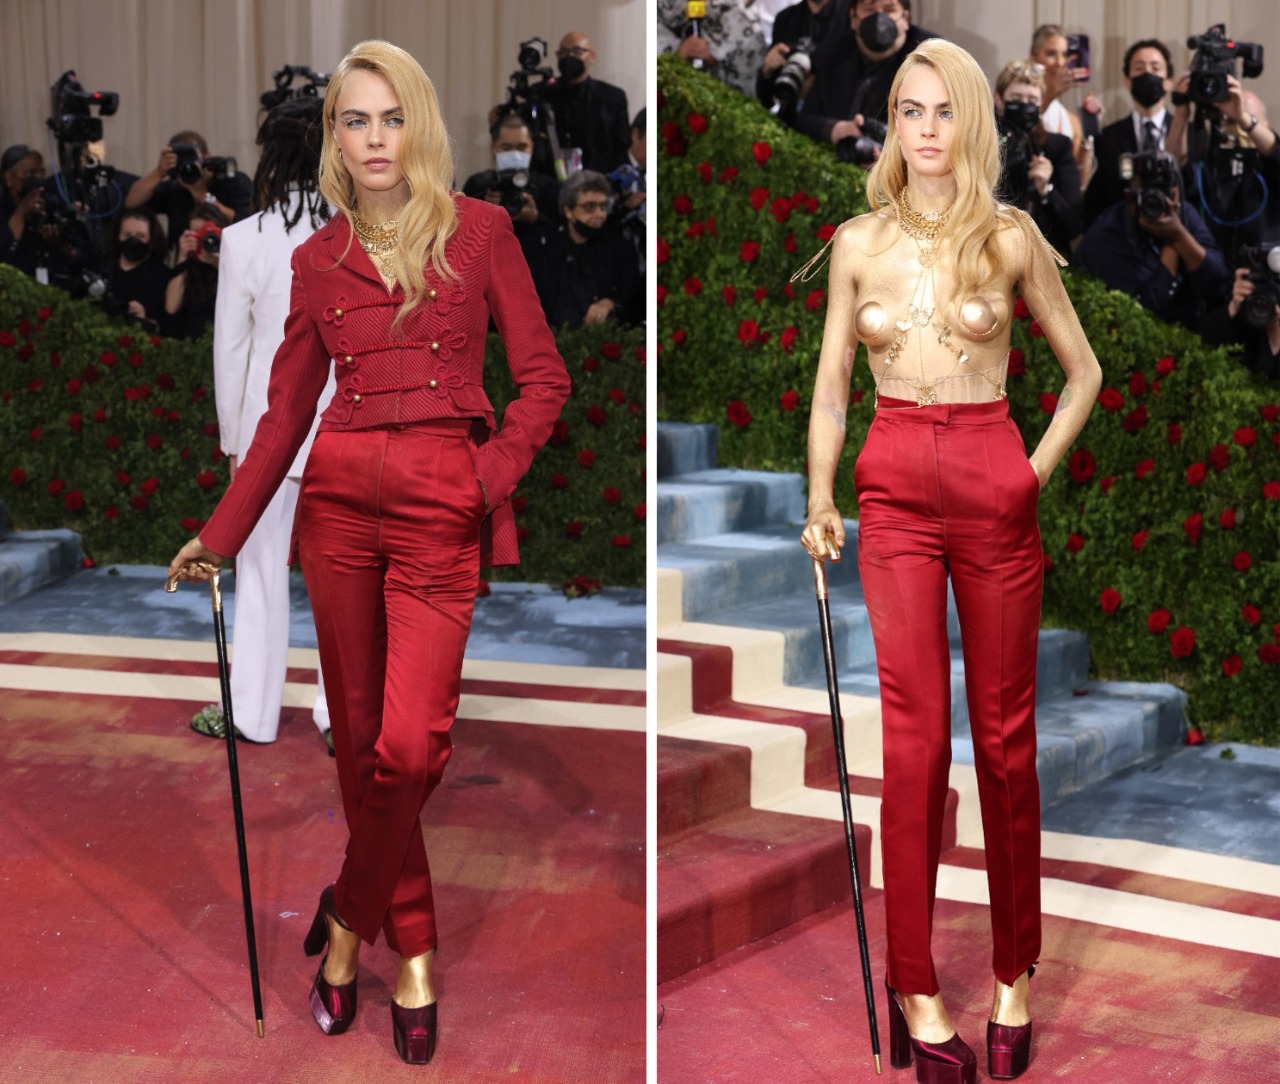 Cara Delevingne goes topless to show gold-painted body on Met Gala red